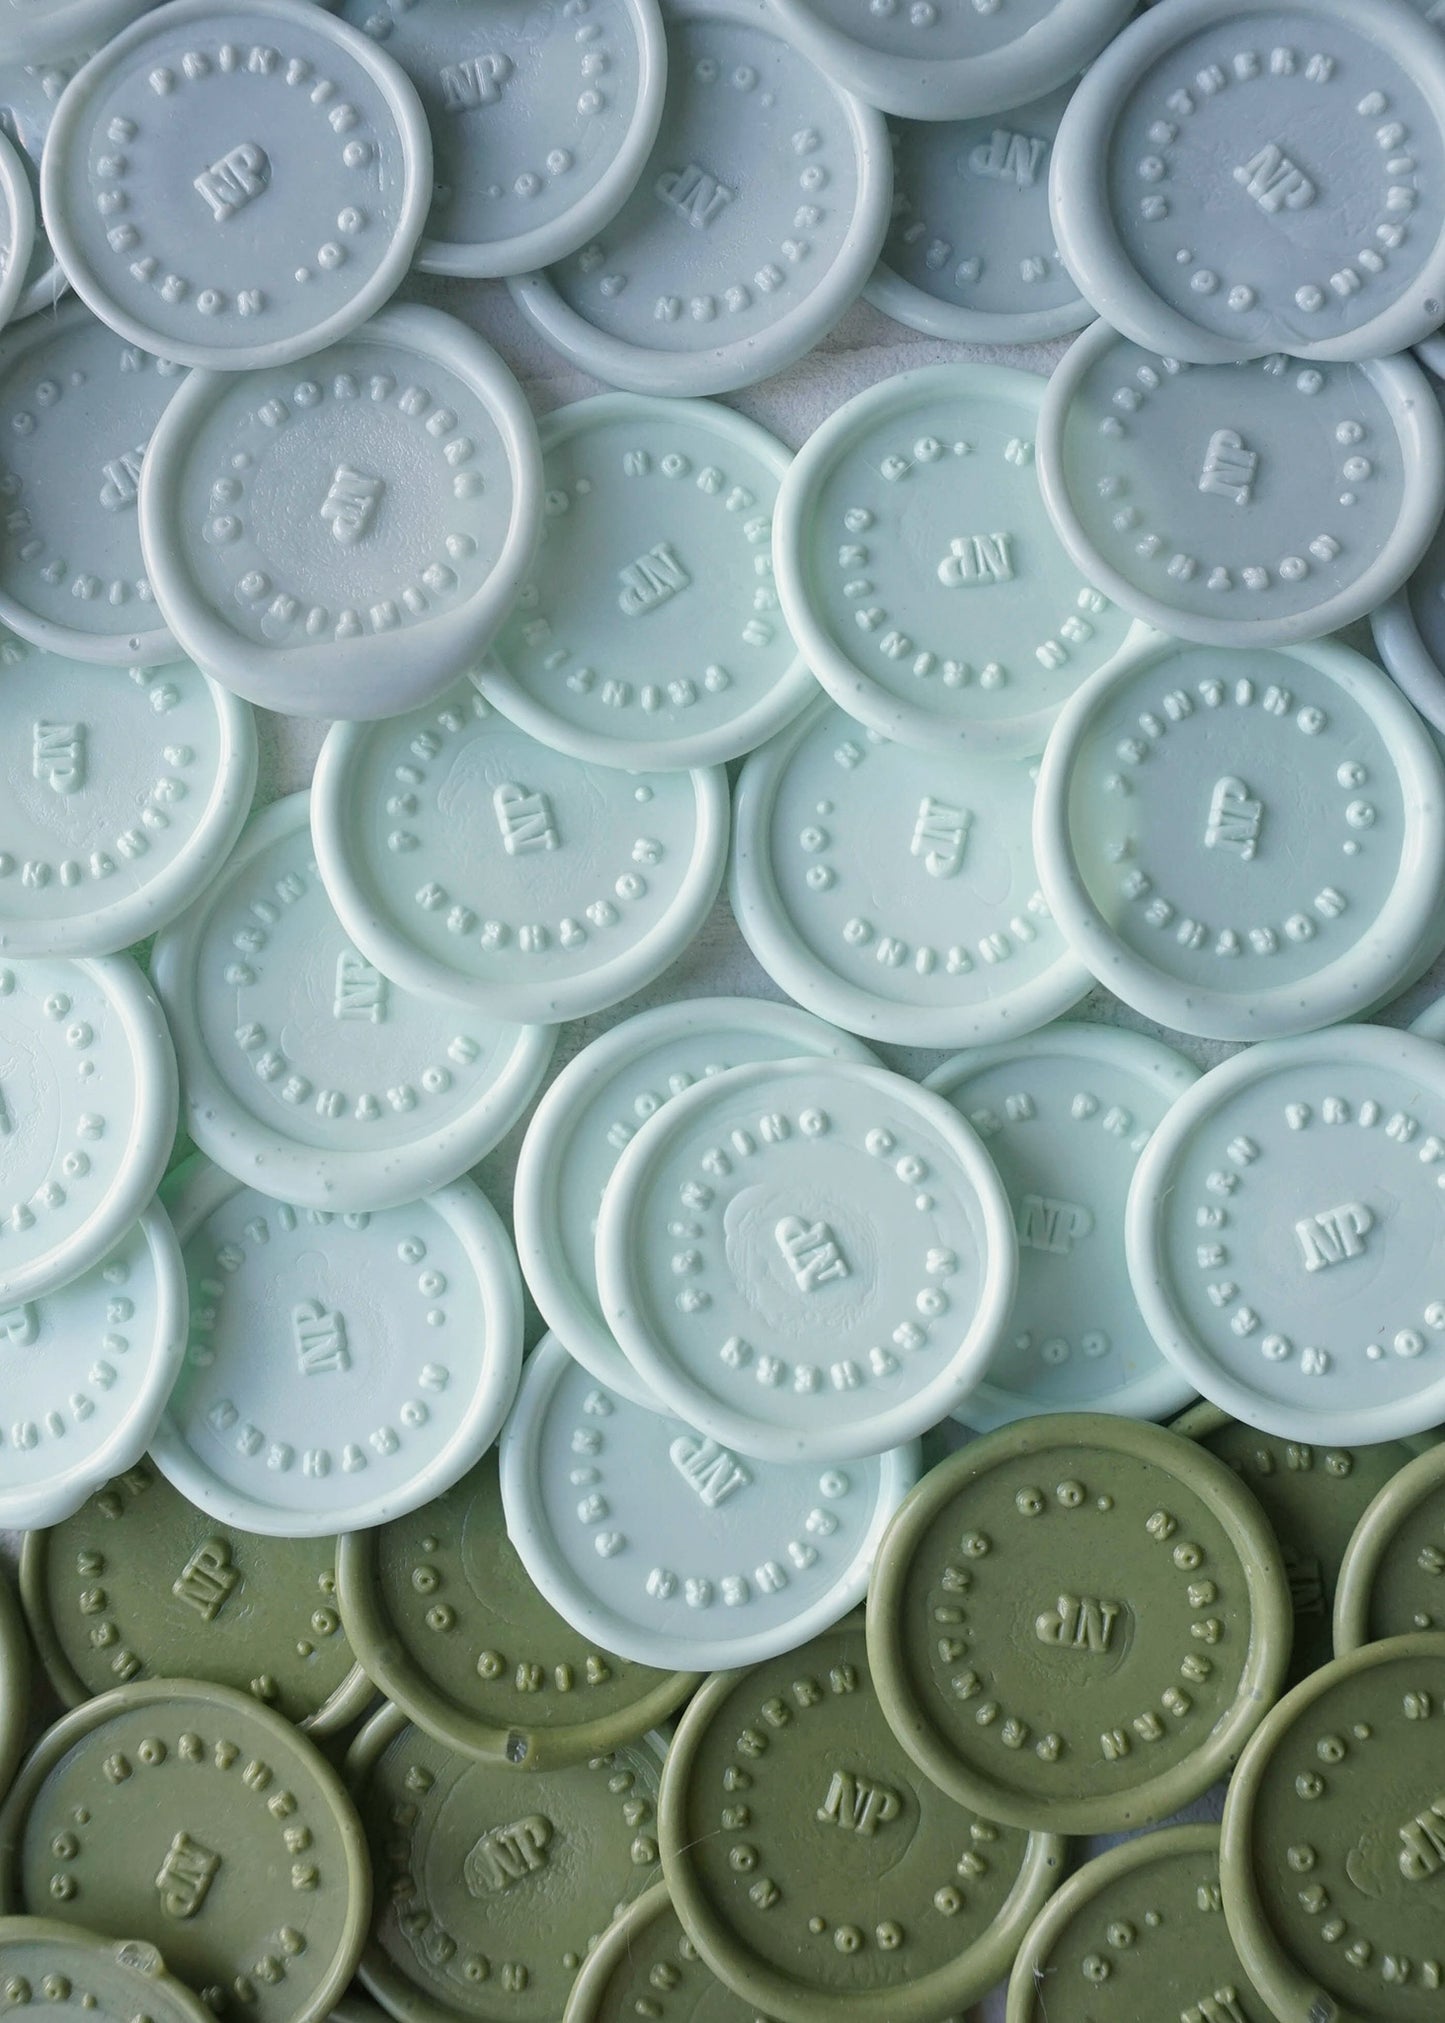 shades of blue, light blue, green wax seal stamps 